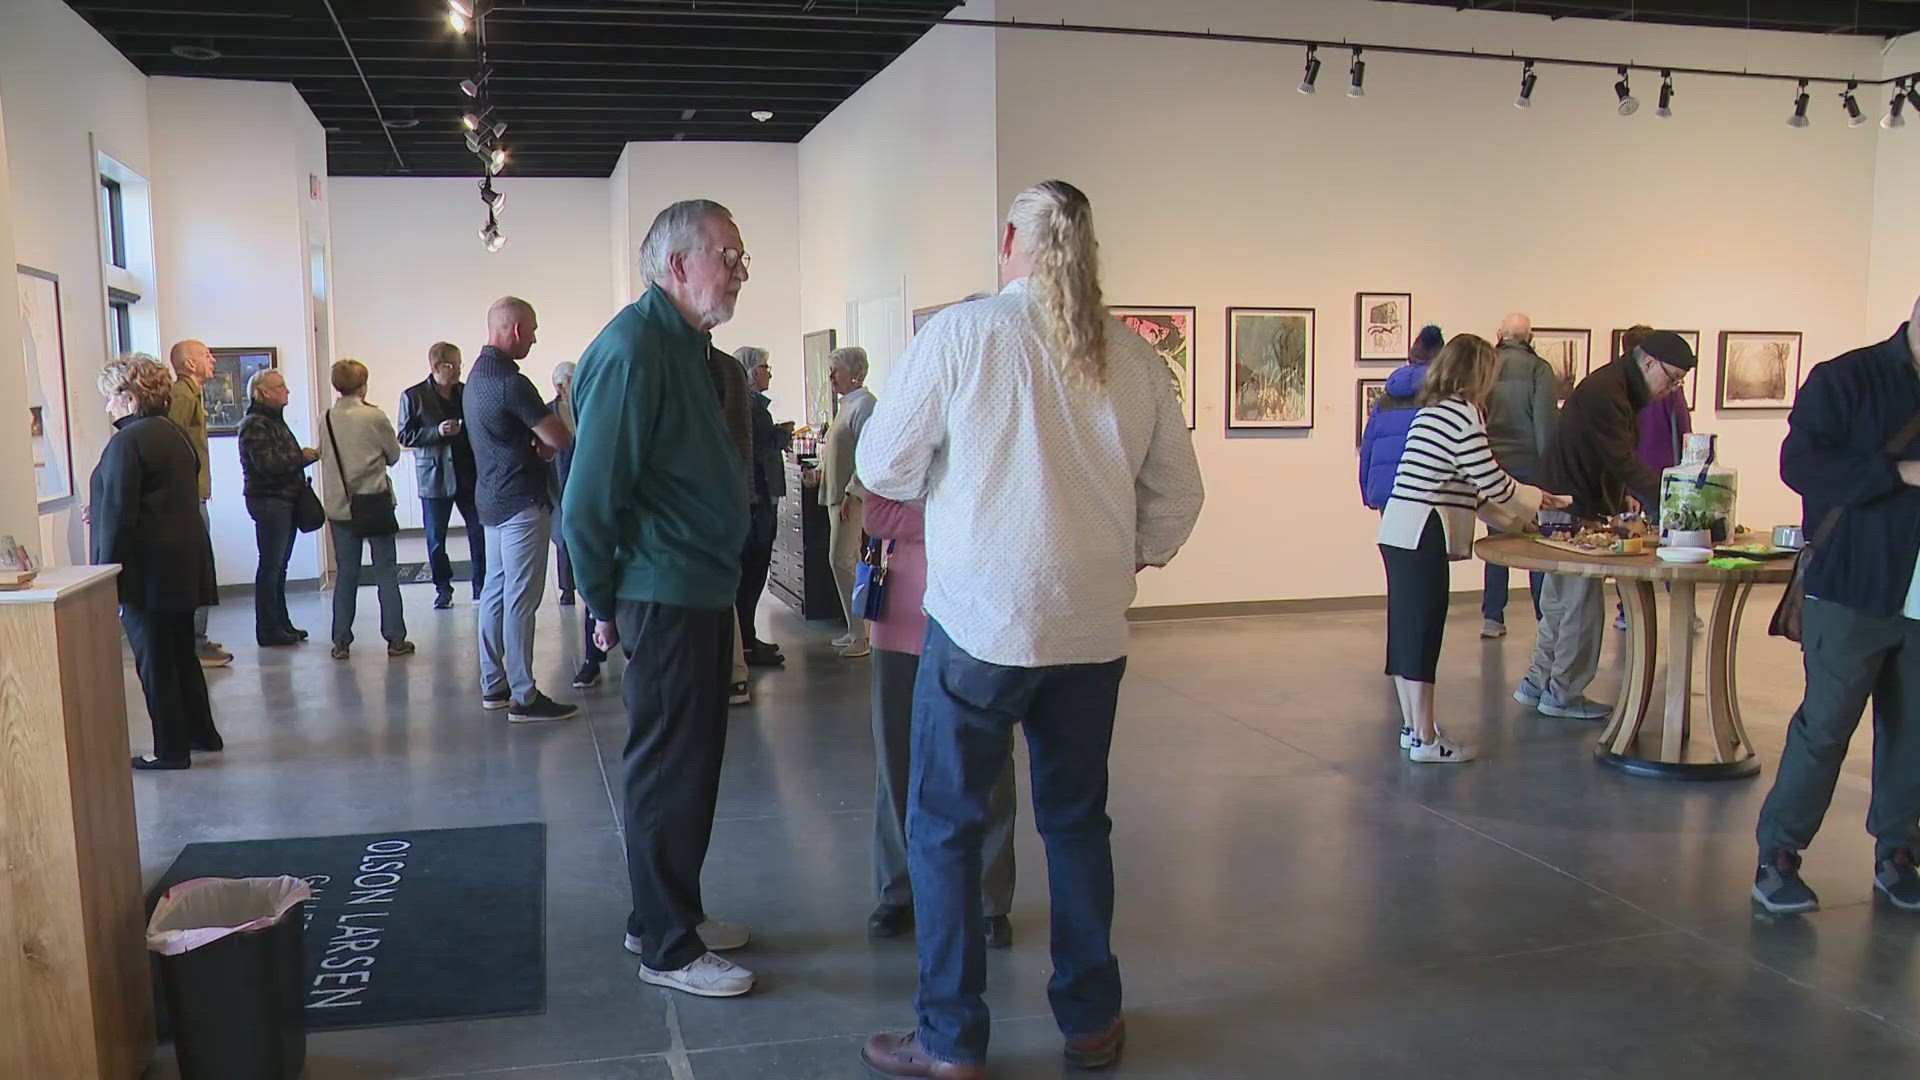 Olson-Larsen Galleries hosted an opening reception to their spring show "Another Side of the Story"